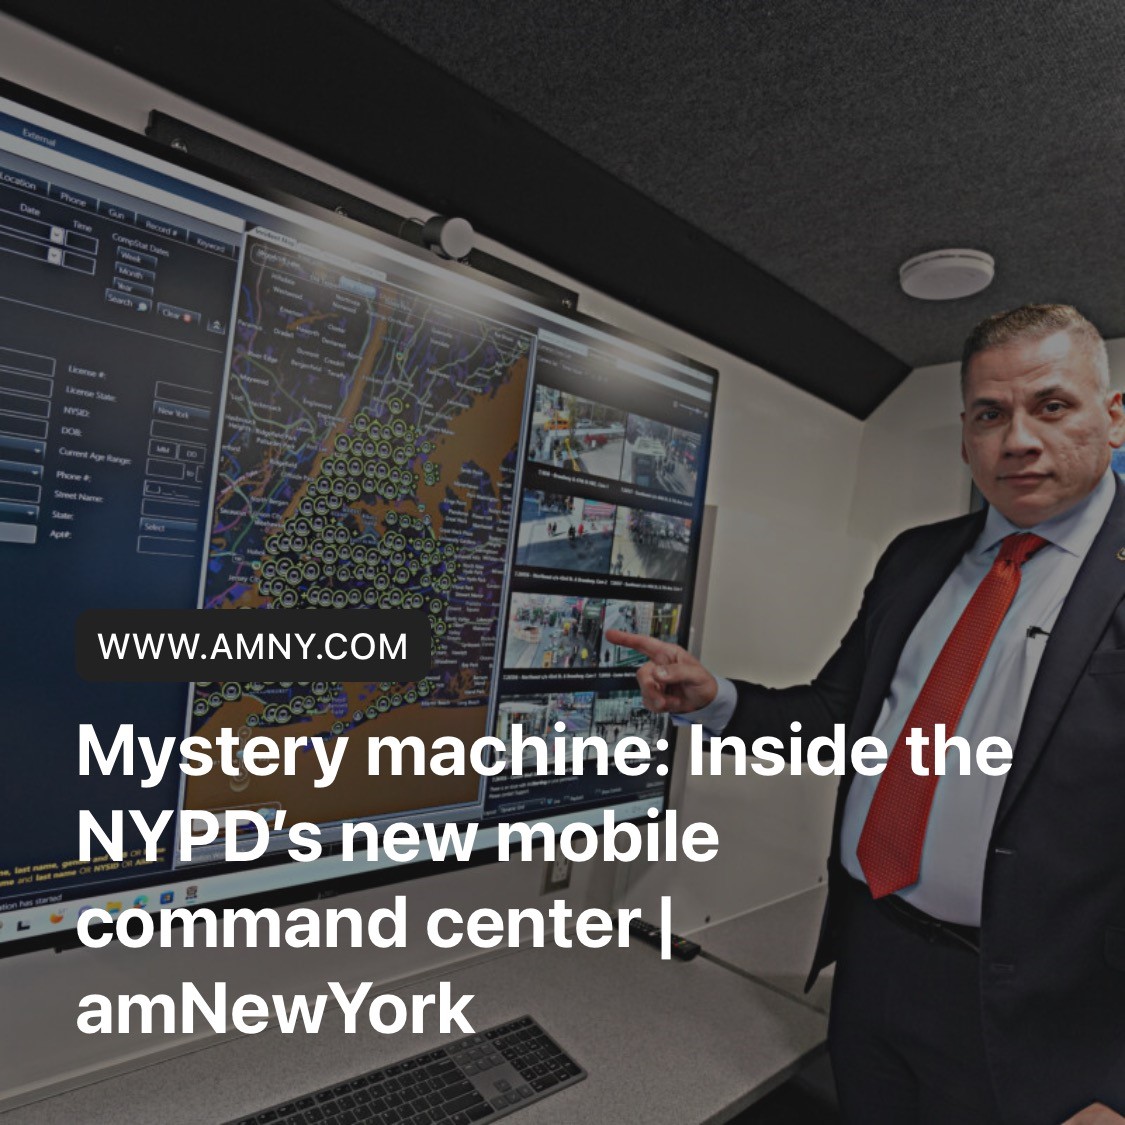 Made possible by the @nycpolicefdtn, the NYPD’s new Real Time Crime Center Emergency Response Van puts the latest tech in the hands of NY’s Finest. Named for fallen 9/11 hero, Det. Joseph Paolillo, the command center is a poignant reminder of Joe’s service. @NYPDnews @NYPDRTCC